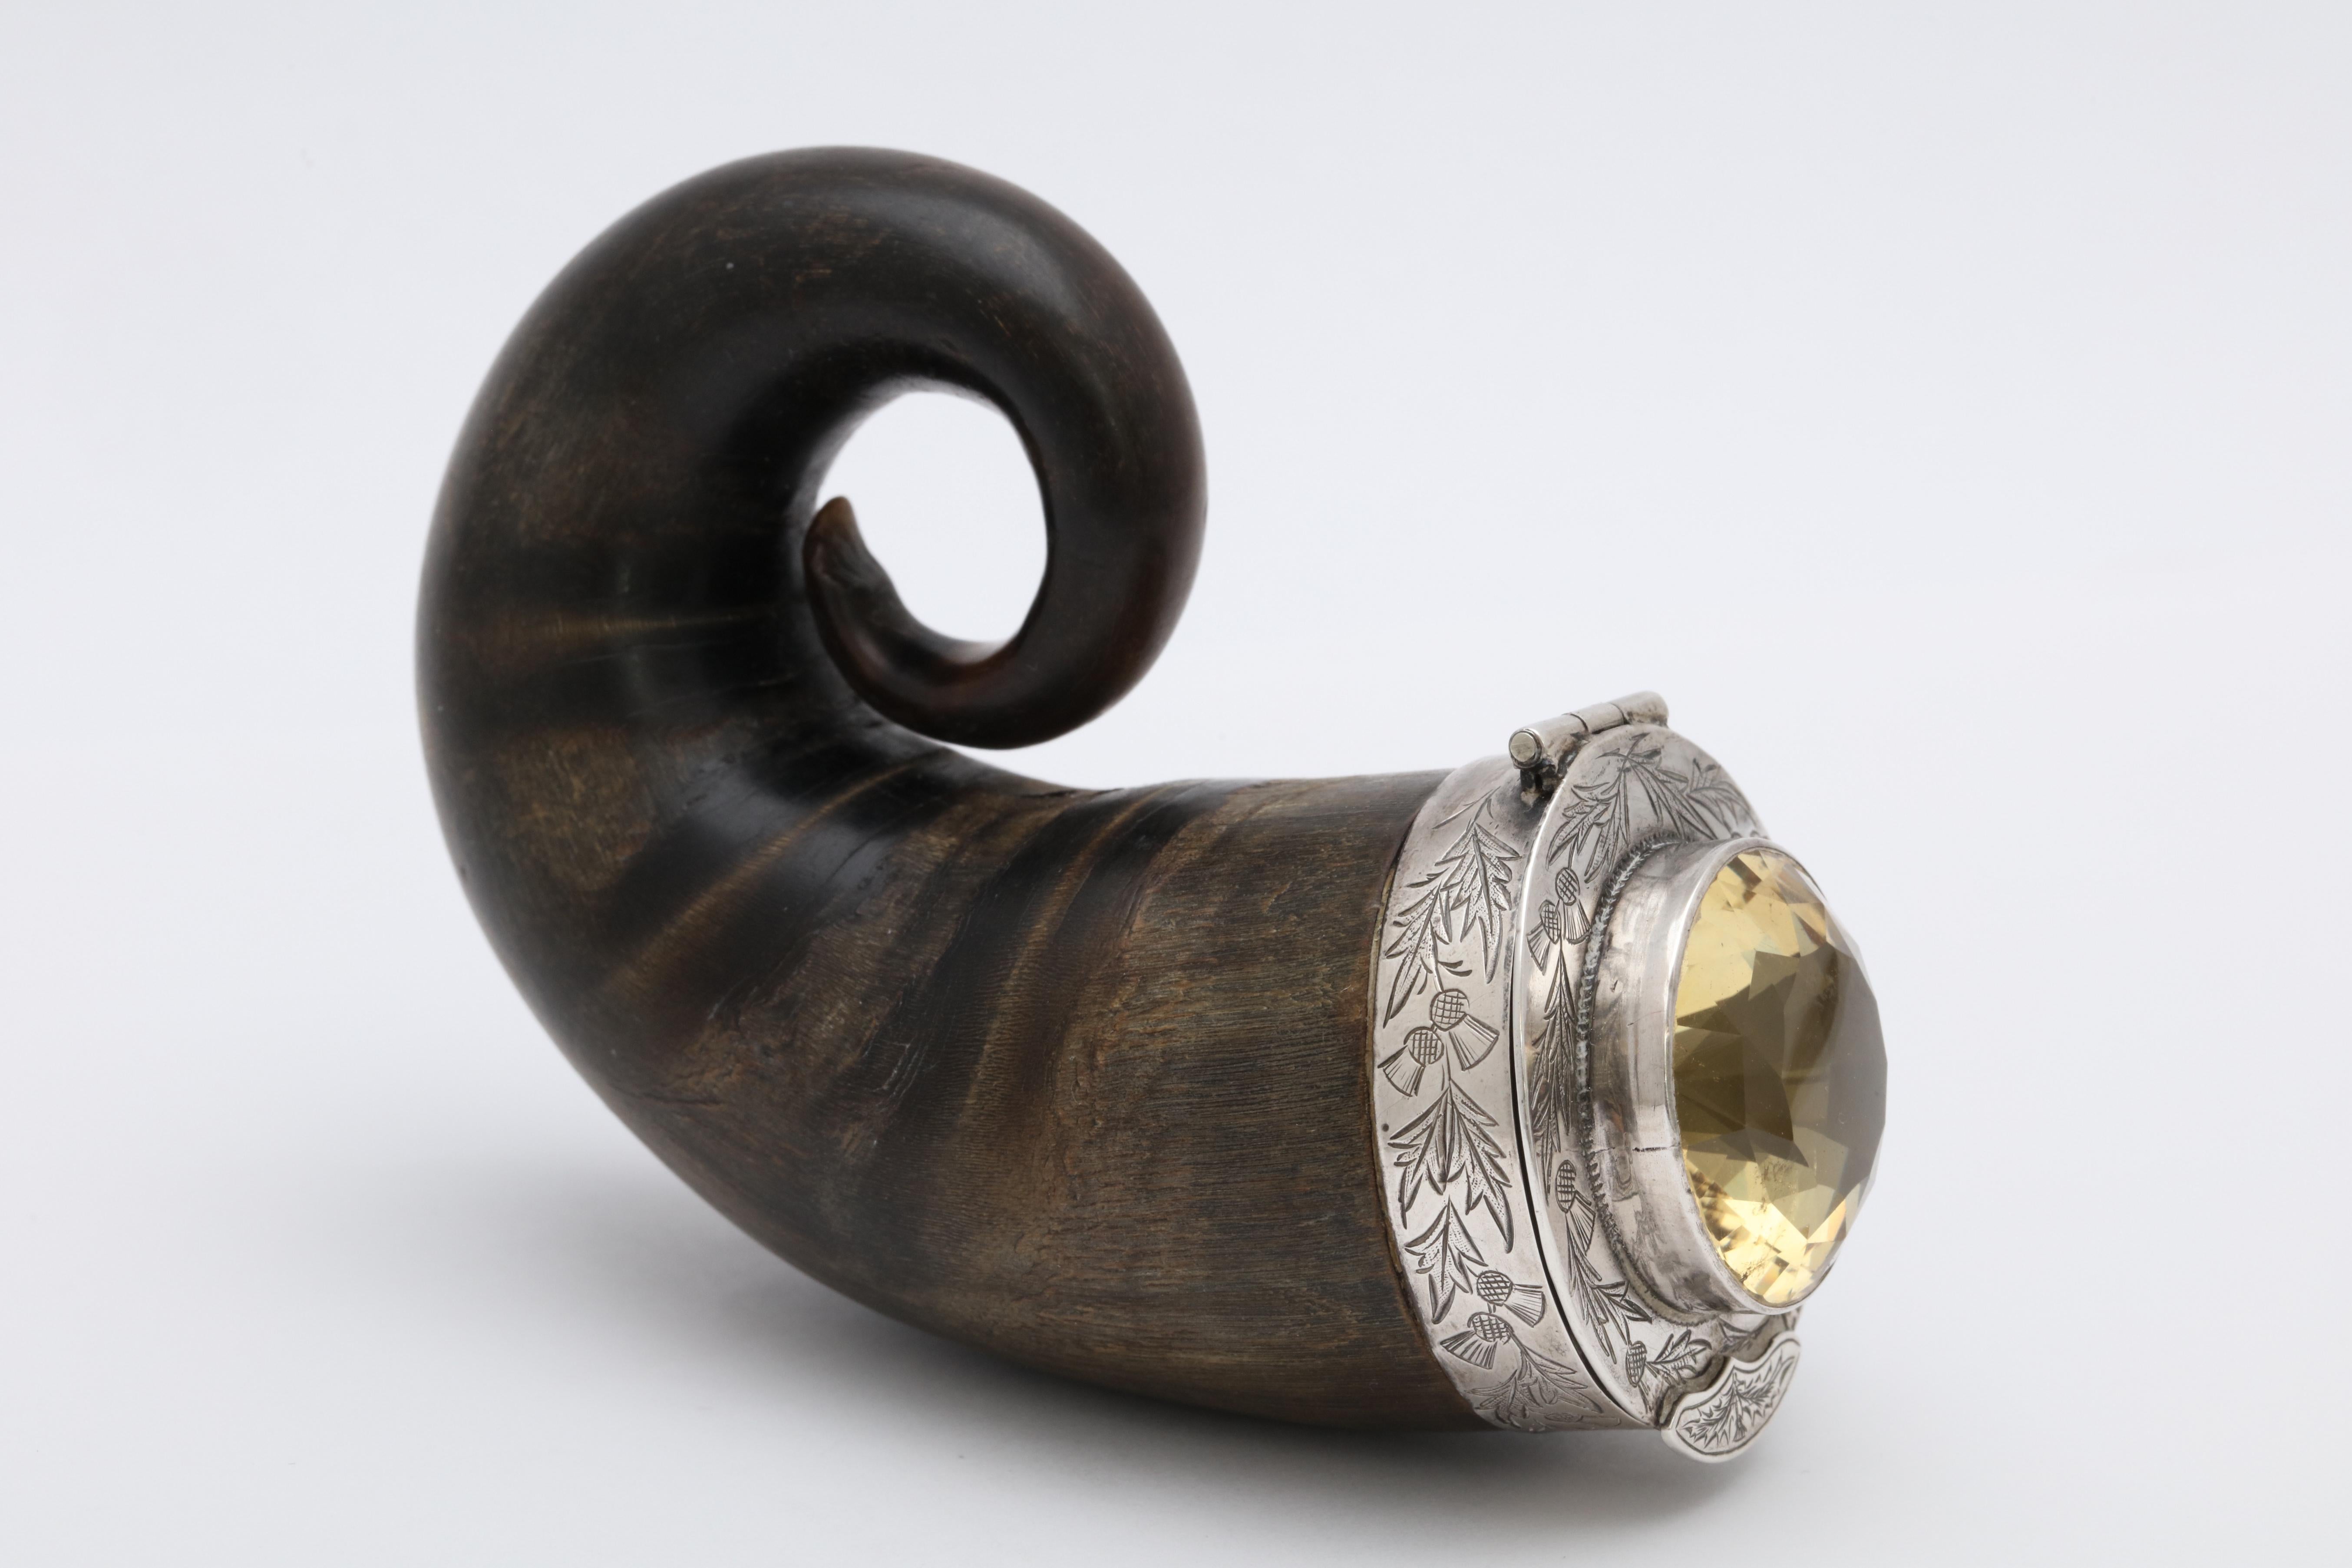 Late 18th Century Georgian 'George III' Sterling Silver-Mounted Horn Snuff Mull with Cairngorm